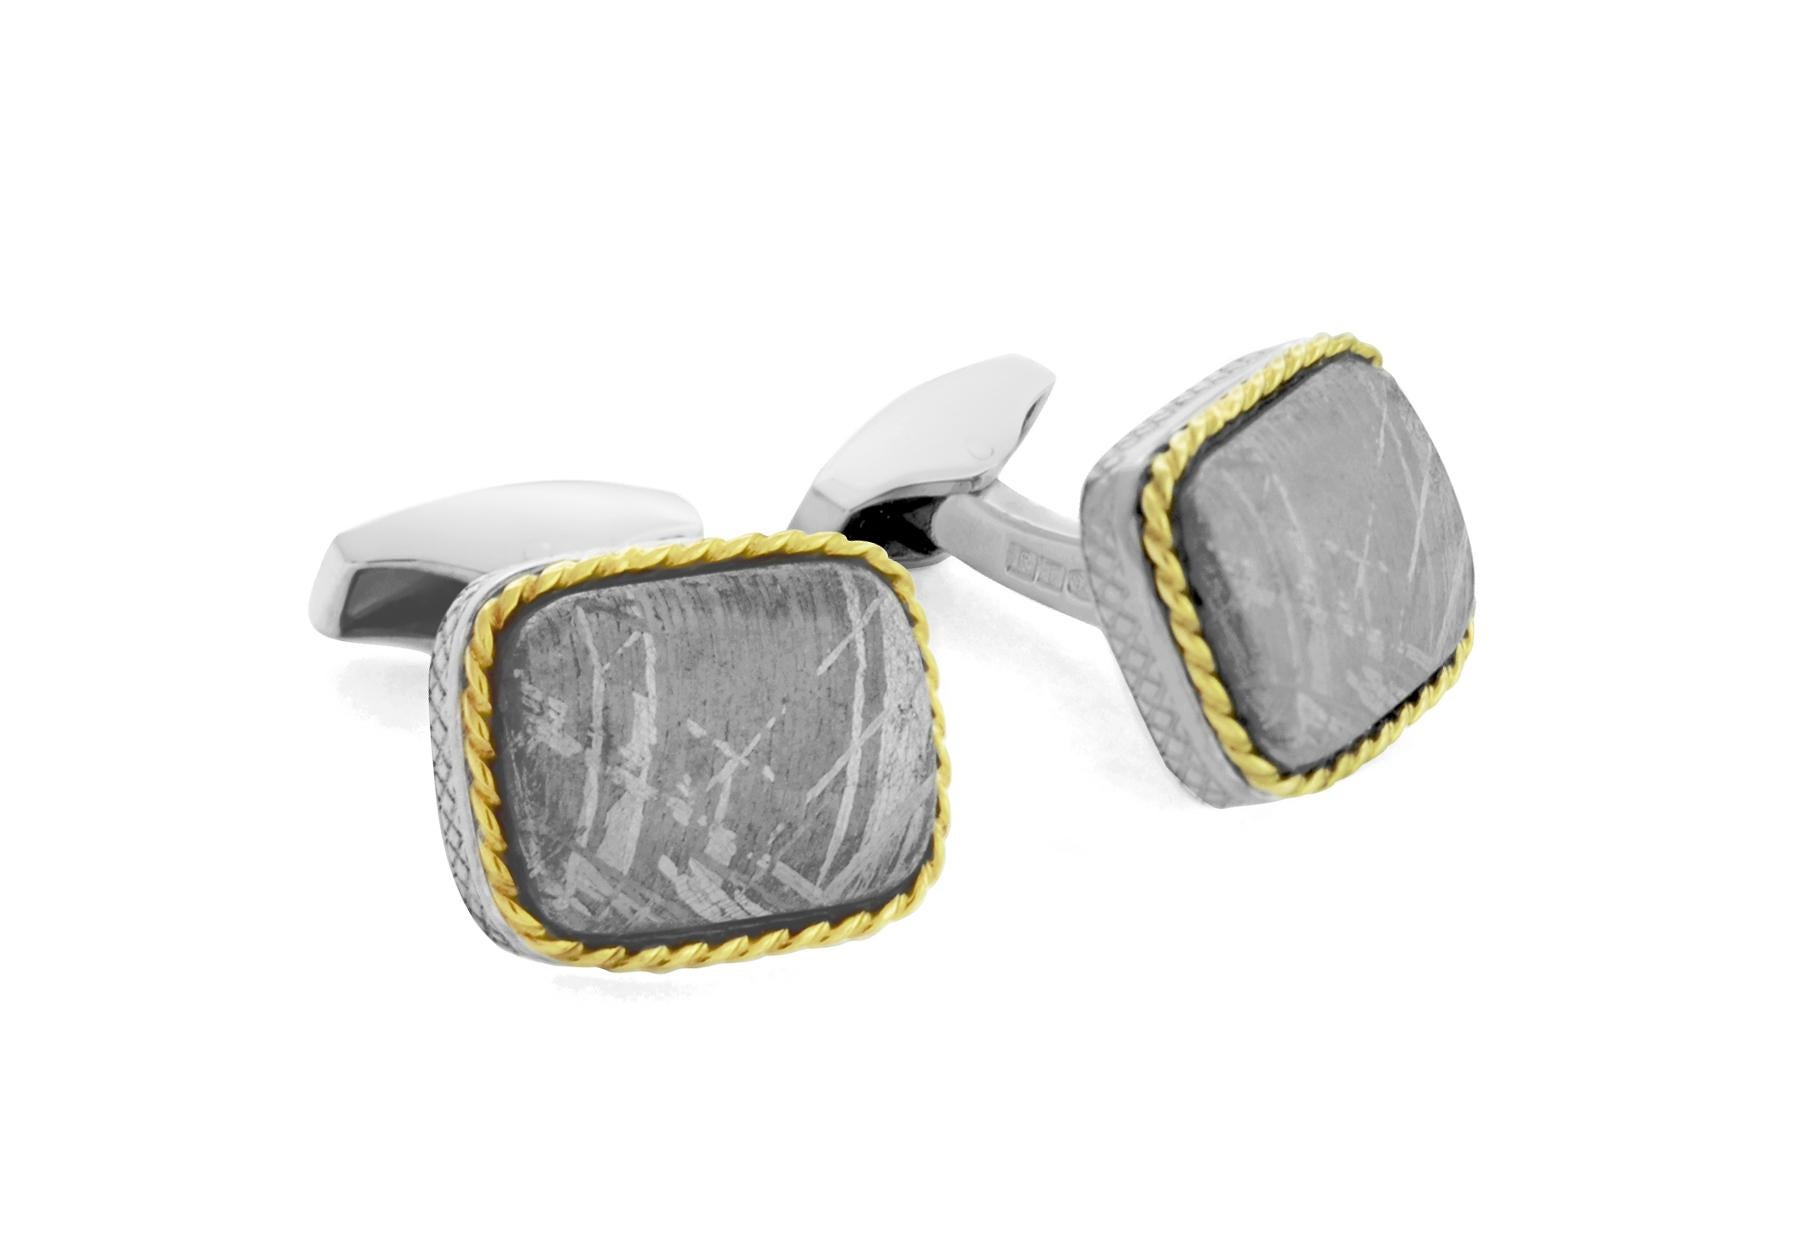 Showcase your unique sense of style in these limited edition rectangular cufflinks. Rare natural meteorite forms an unusual centrepiece – each Gibeon meteorite fragment is over 30,000 years old, with a natural patterned surface. Encased in sterling